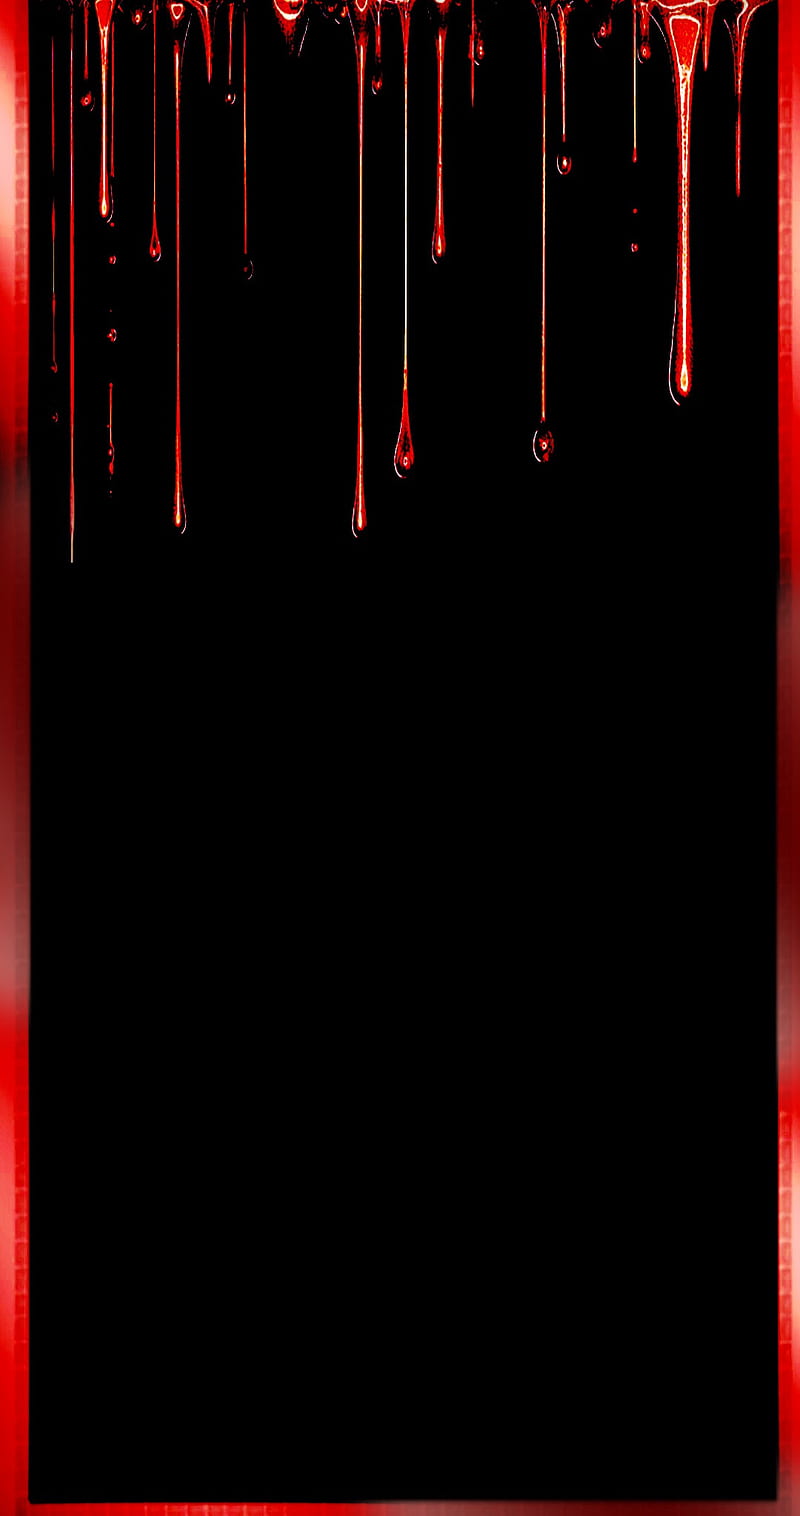 A black background with red dripping blood. - Blood